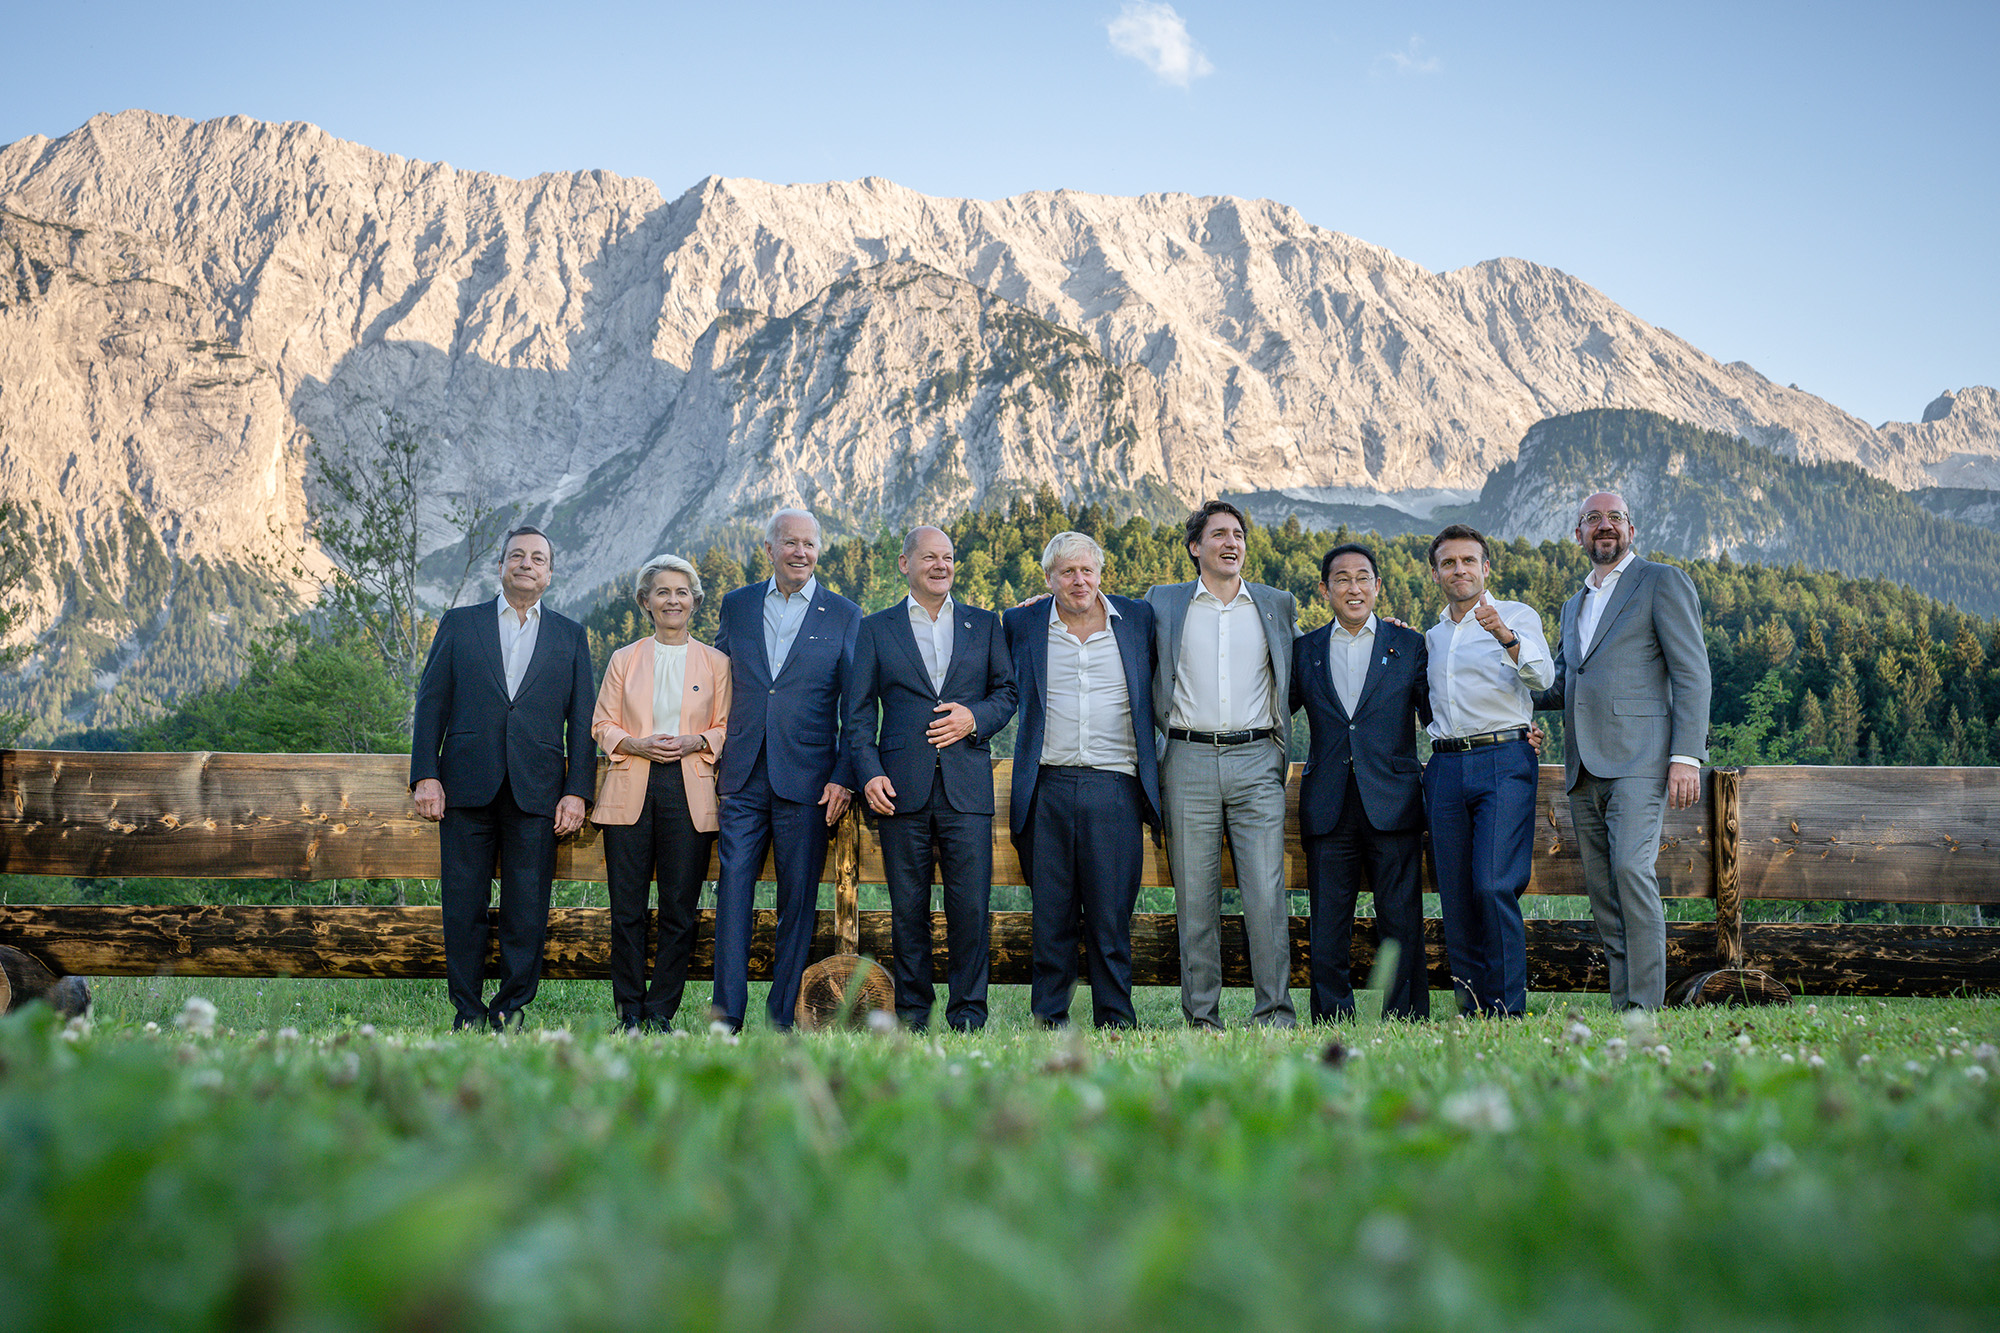 The G7 leaders lined up for an informal group photo at the "Merkel - Obama" bench after dinner at the G7 meeting at Schloss Elmau, Germany, on June 26. 